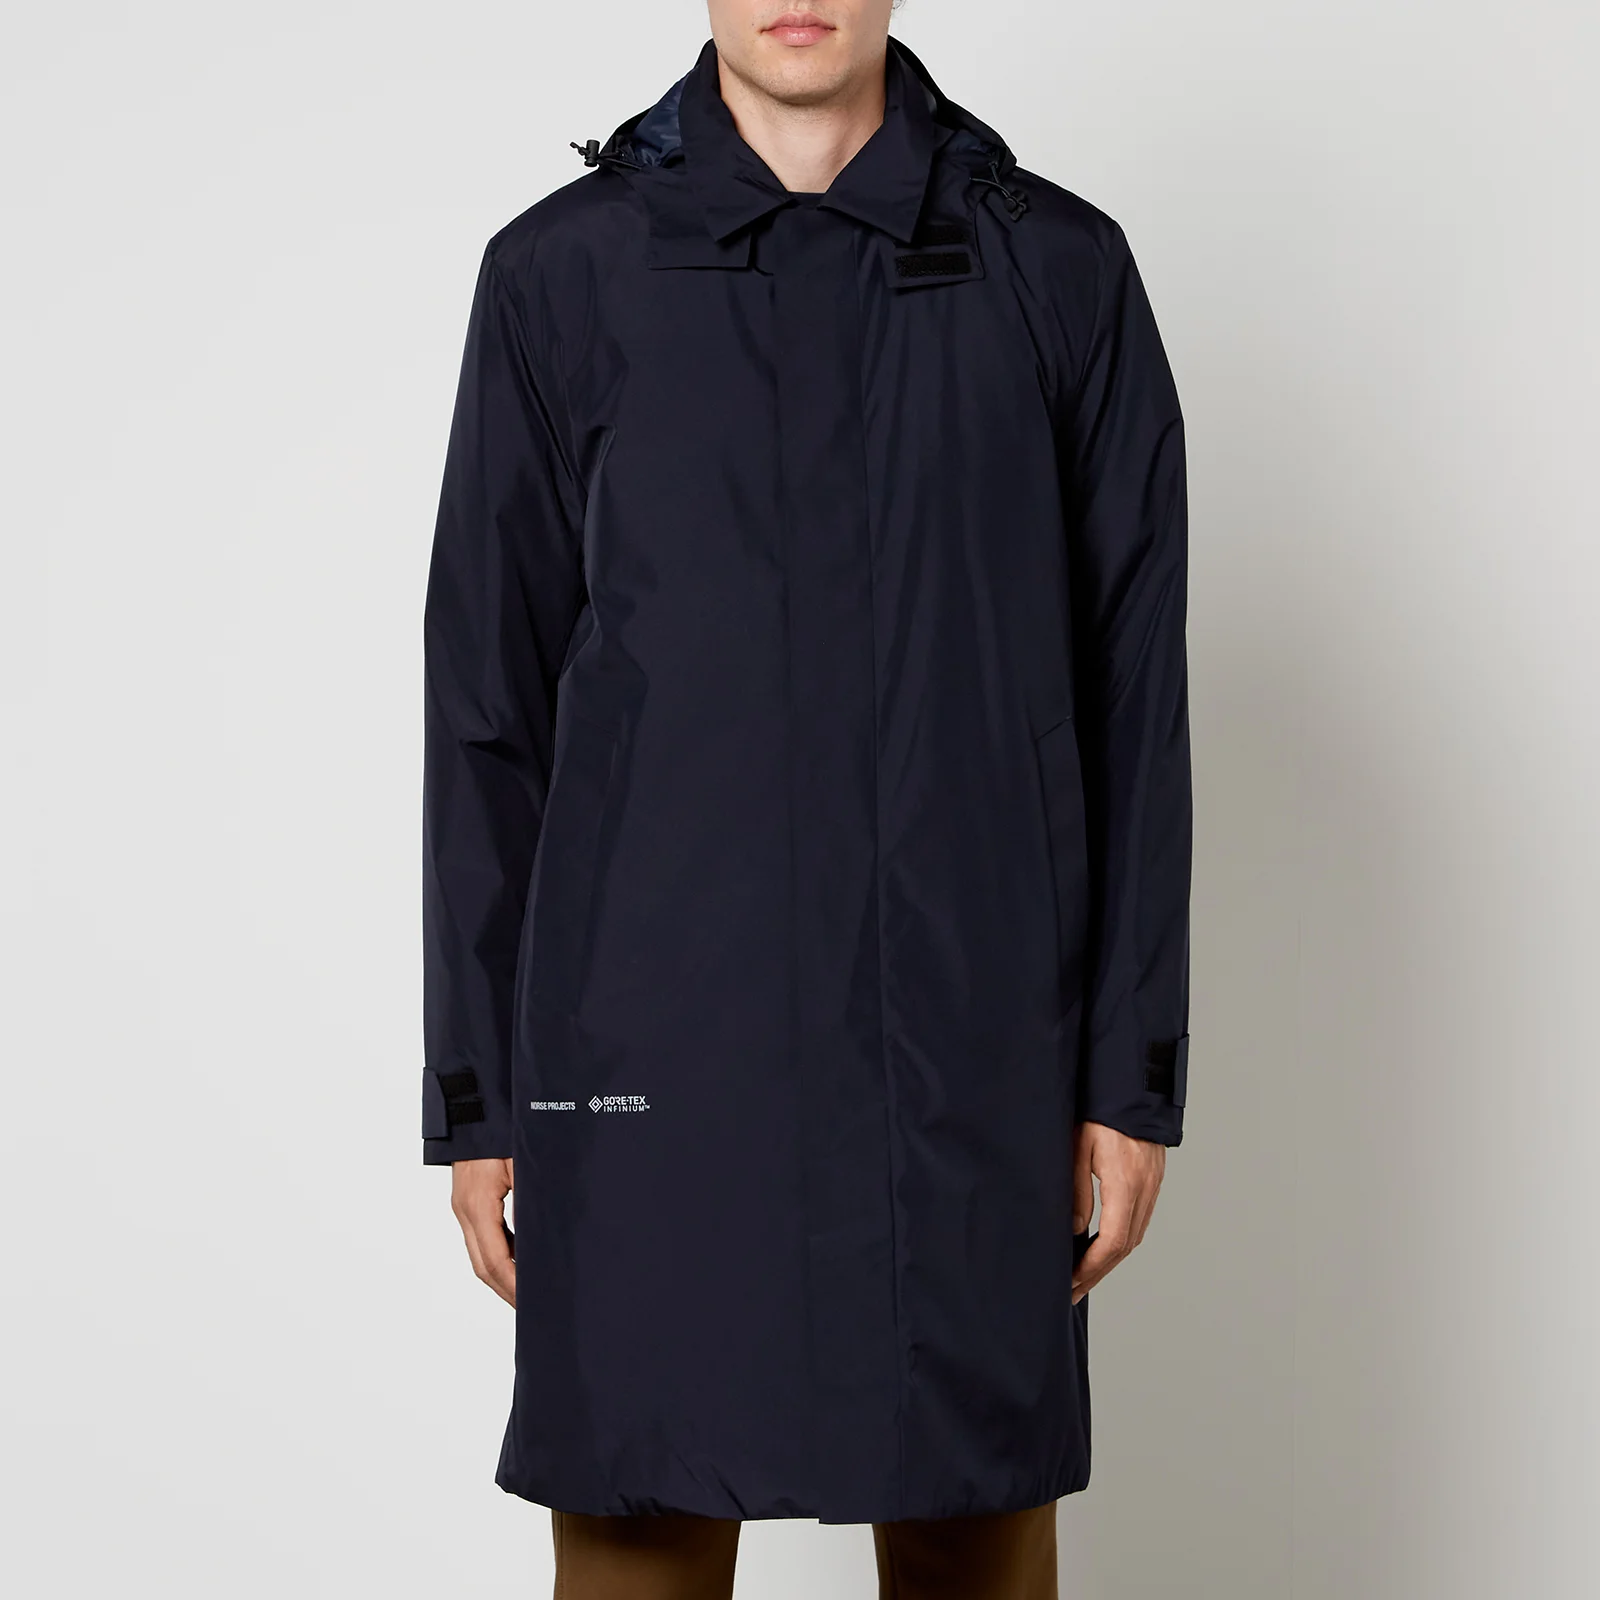 Norse Projects Thor GORE-TEX INFINIUM 2.0 Jacket Image 1